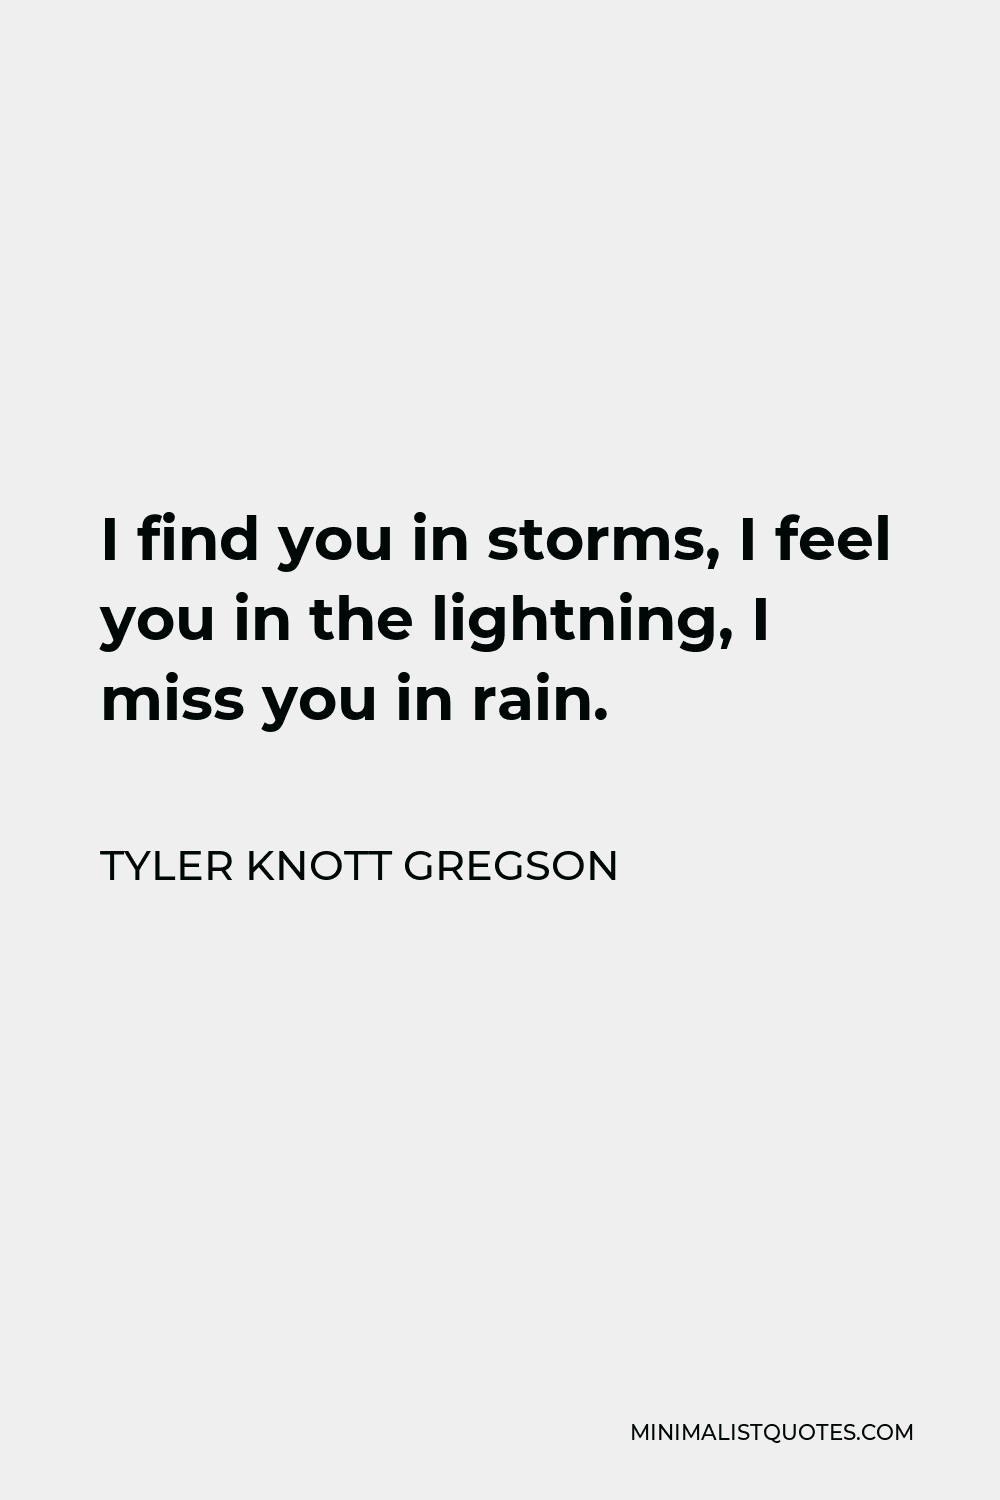 Tyler Knott Gregson Quote - I find you in storms, I feel you in the lightning, I miss you in rain.